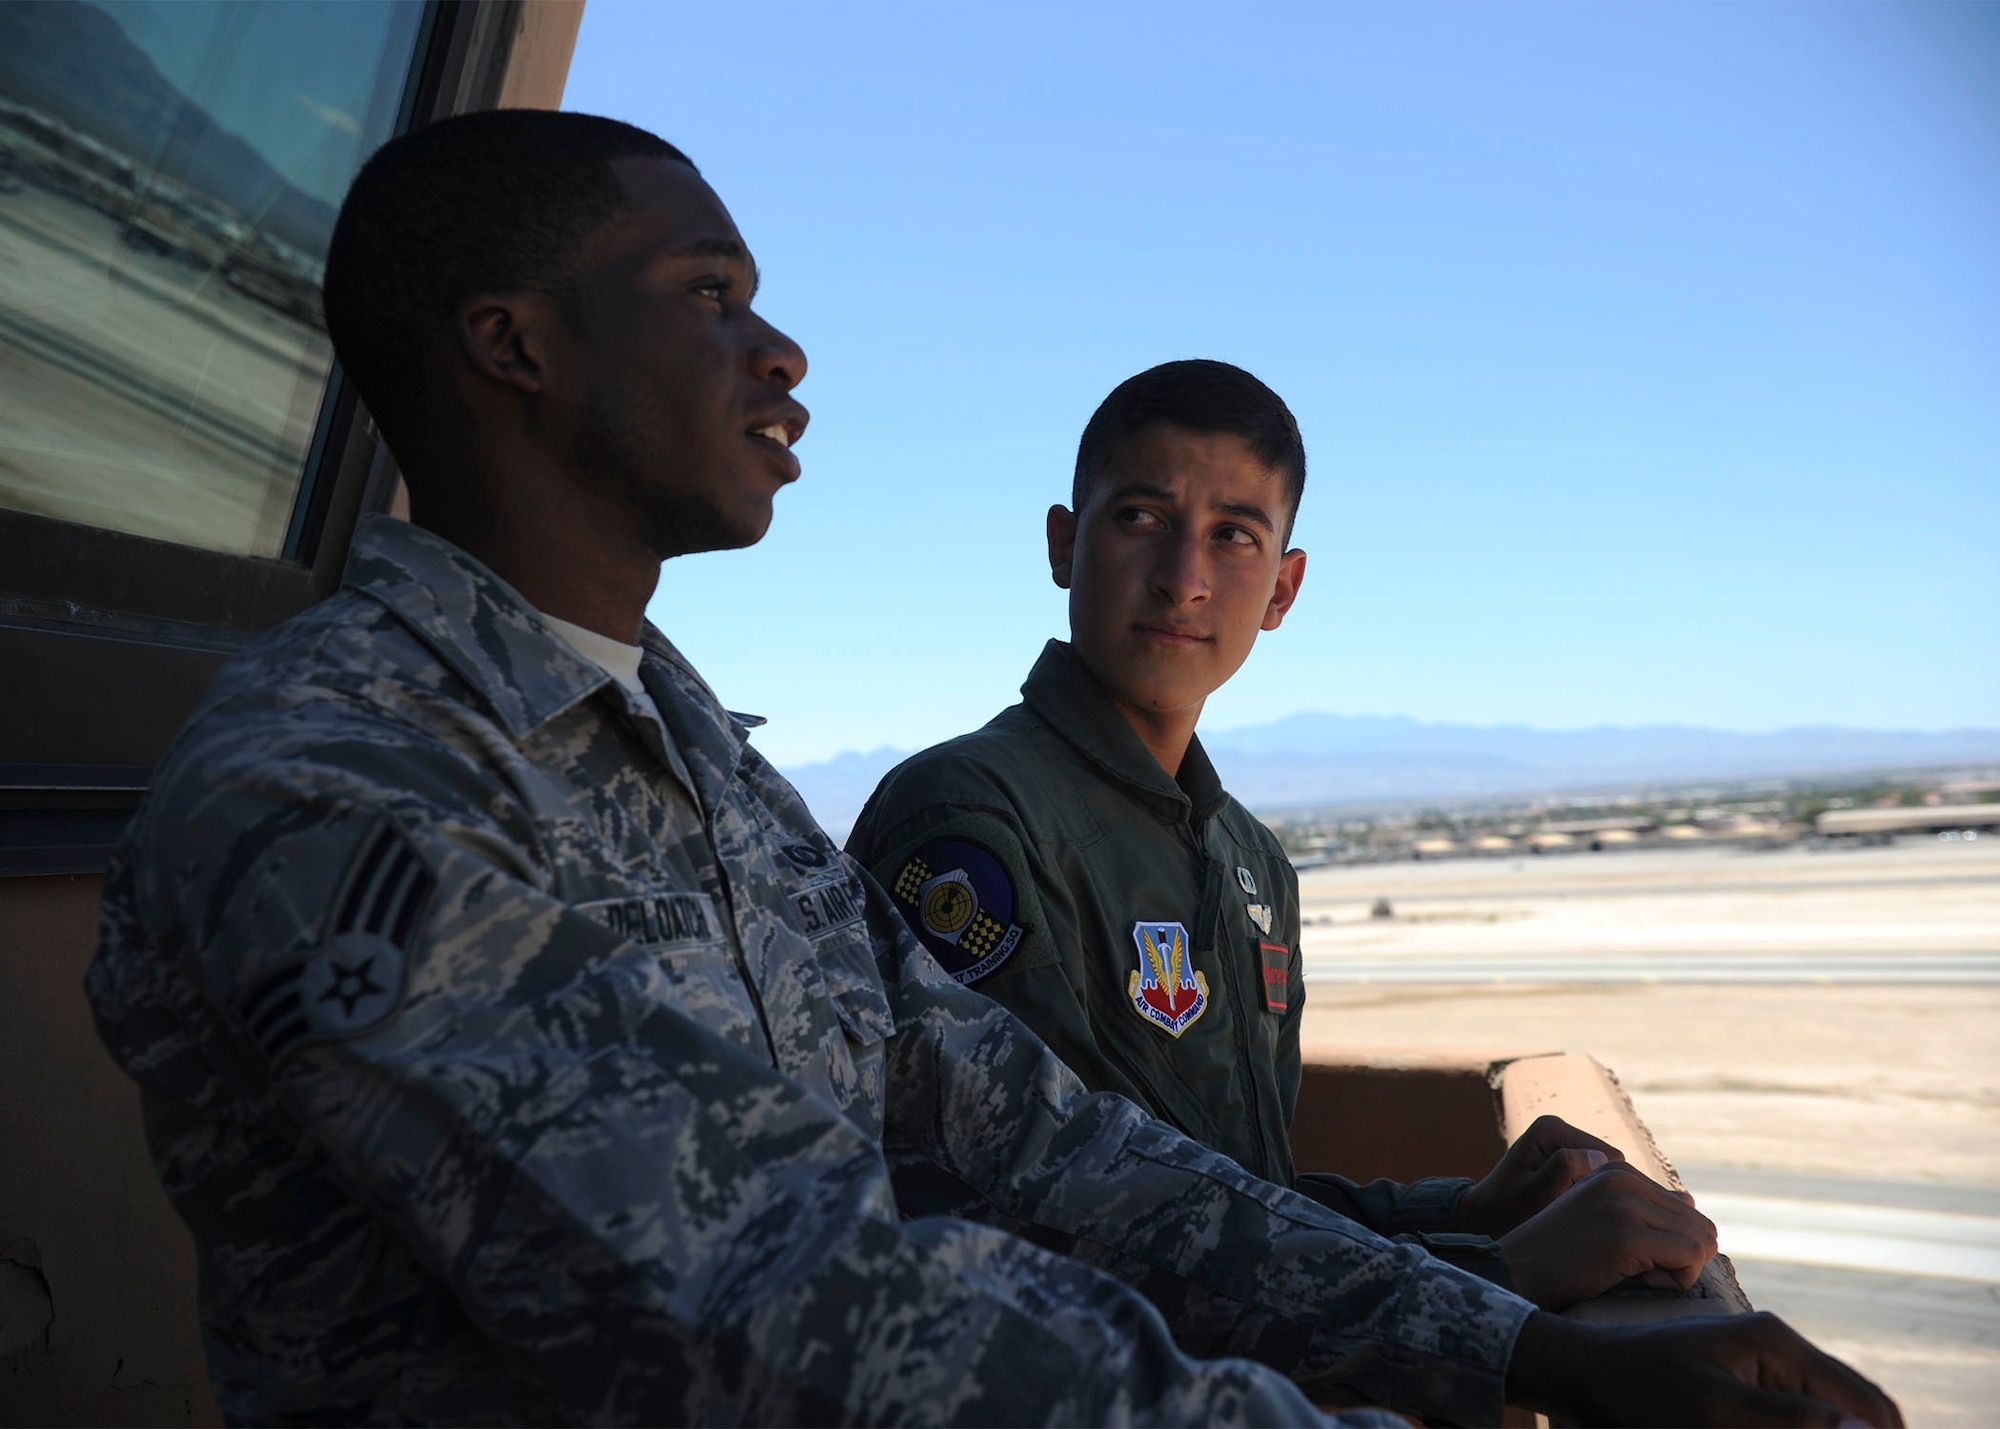 Senior Airman Nathaniel Deloatch, 57th Operations Support Squadron air traffic controller, gives Reymond a first-hand glimpse on what it’s like to be in the air traffic control tower during a Red Flag exercise at Nellis Air Force Base, Nev., July 19, 2016. Approximately 100 aircraft and 3,500 participants from 40 U.S. military units are participating in Red Flag 16-3. (U.S. Air Force photo by Staff Sgt. Darlene Seltmann)